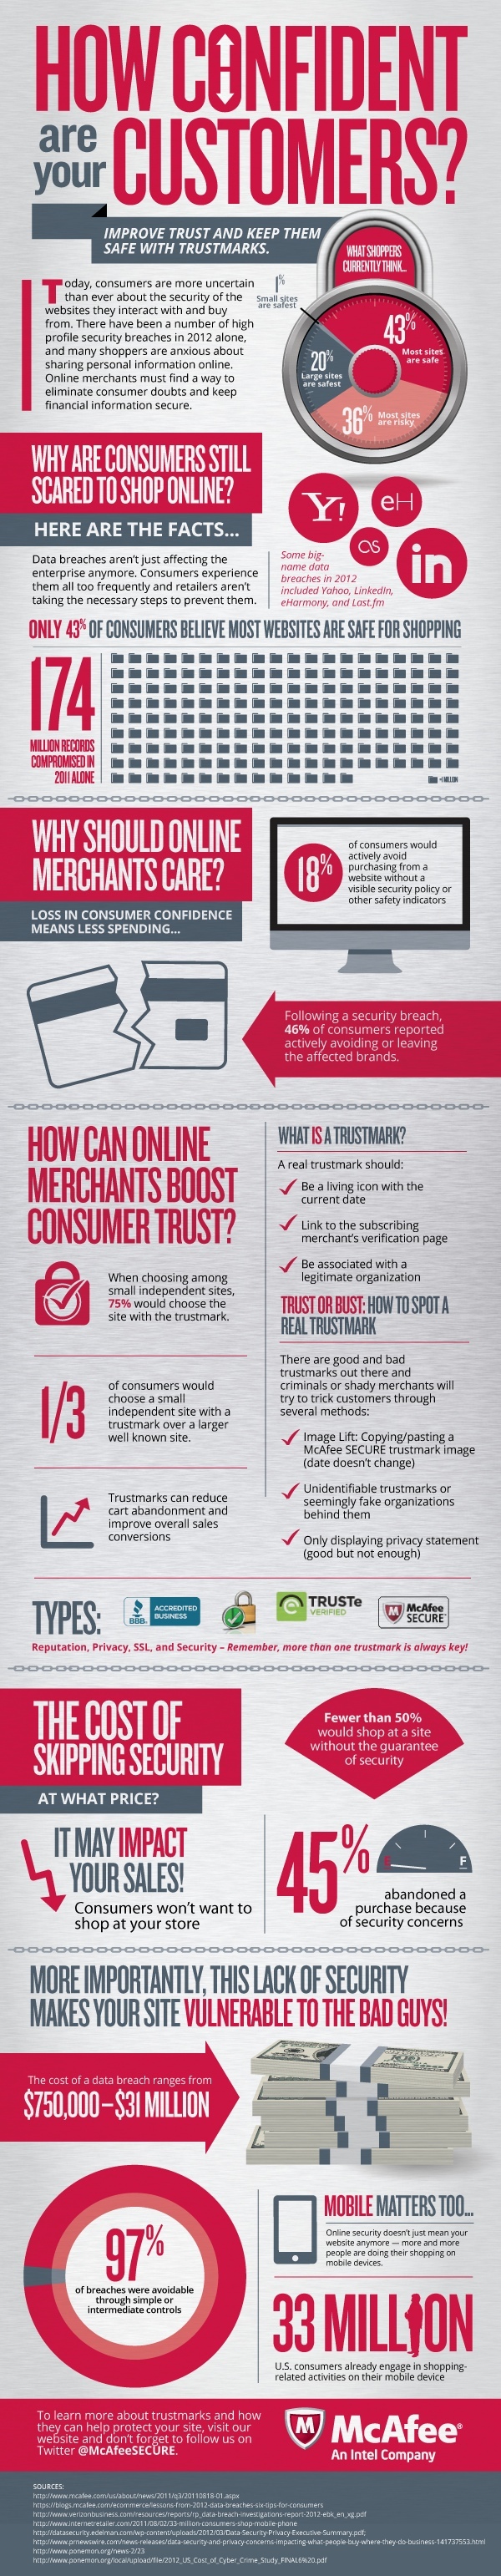 How Confident are Your Customers? Increase trust with TrustMarks - Infographic